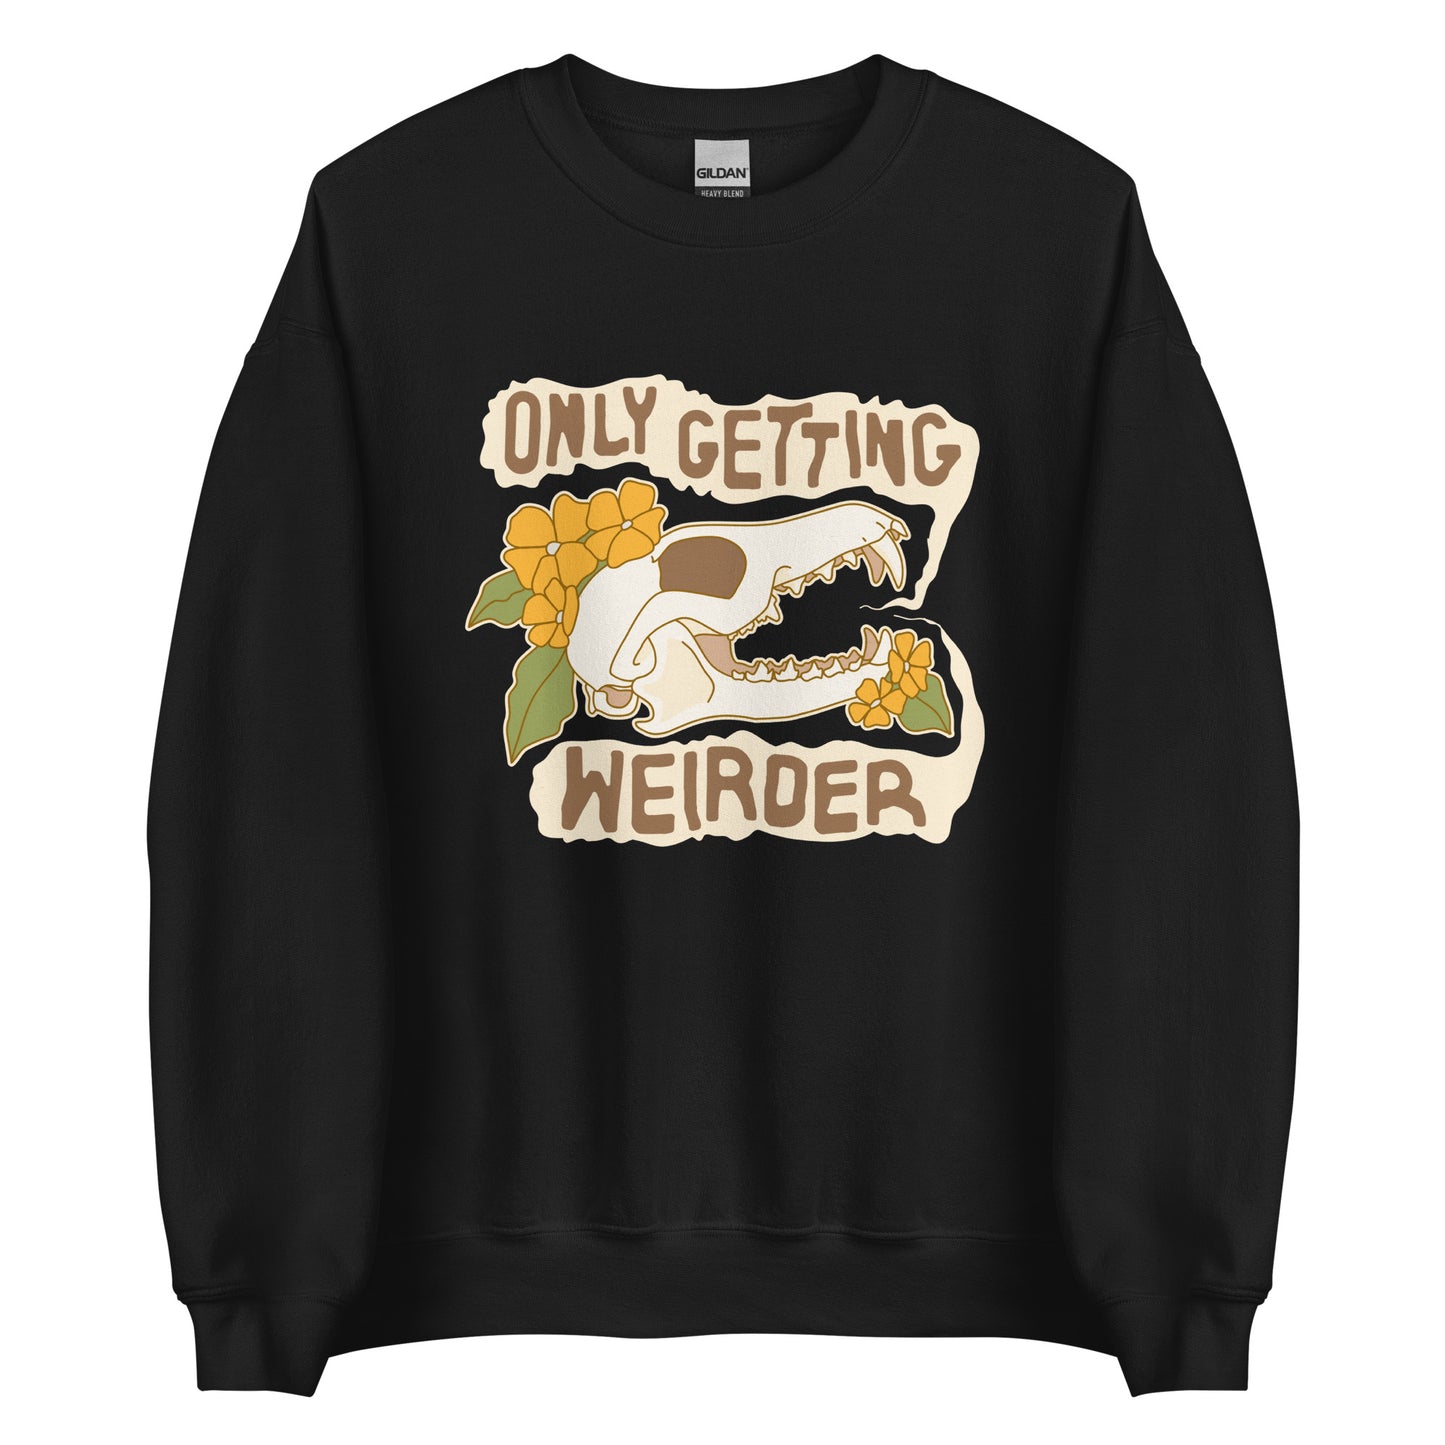 A black crewneck sweatshirt featuring an illustration of a fox skull surrounded by yellow flowers. Wobbly speech bubbles are coming from the fox's mouth. The text inside the bubbles reads "ONLY GETTING WEIRDER".